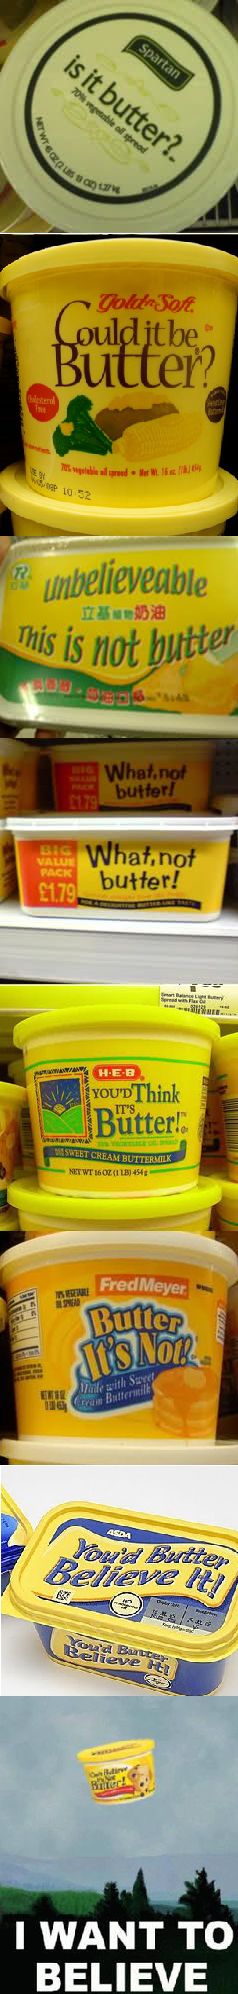 is it butter?
 Could it be Butter?
 Unbelievable This is not butter
 What, not butter!
 YOU'D Think IT'S Butter!
 Butter It's Not!
 You'd Butter Believe It!
 I WANT TO BELIEVE